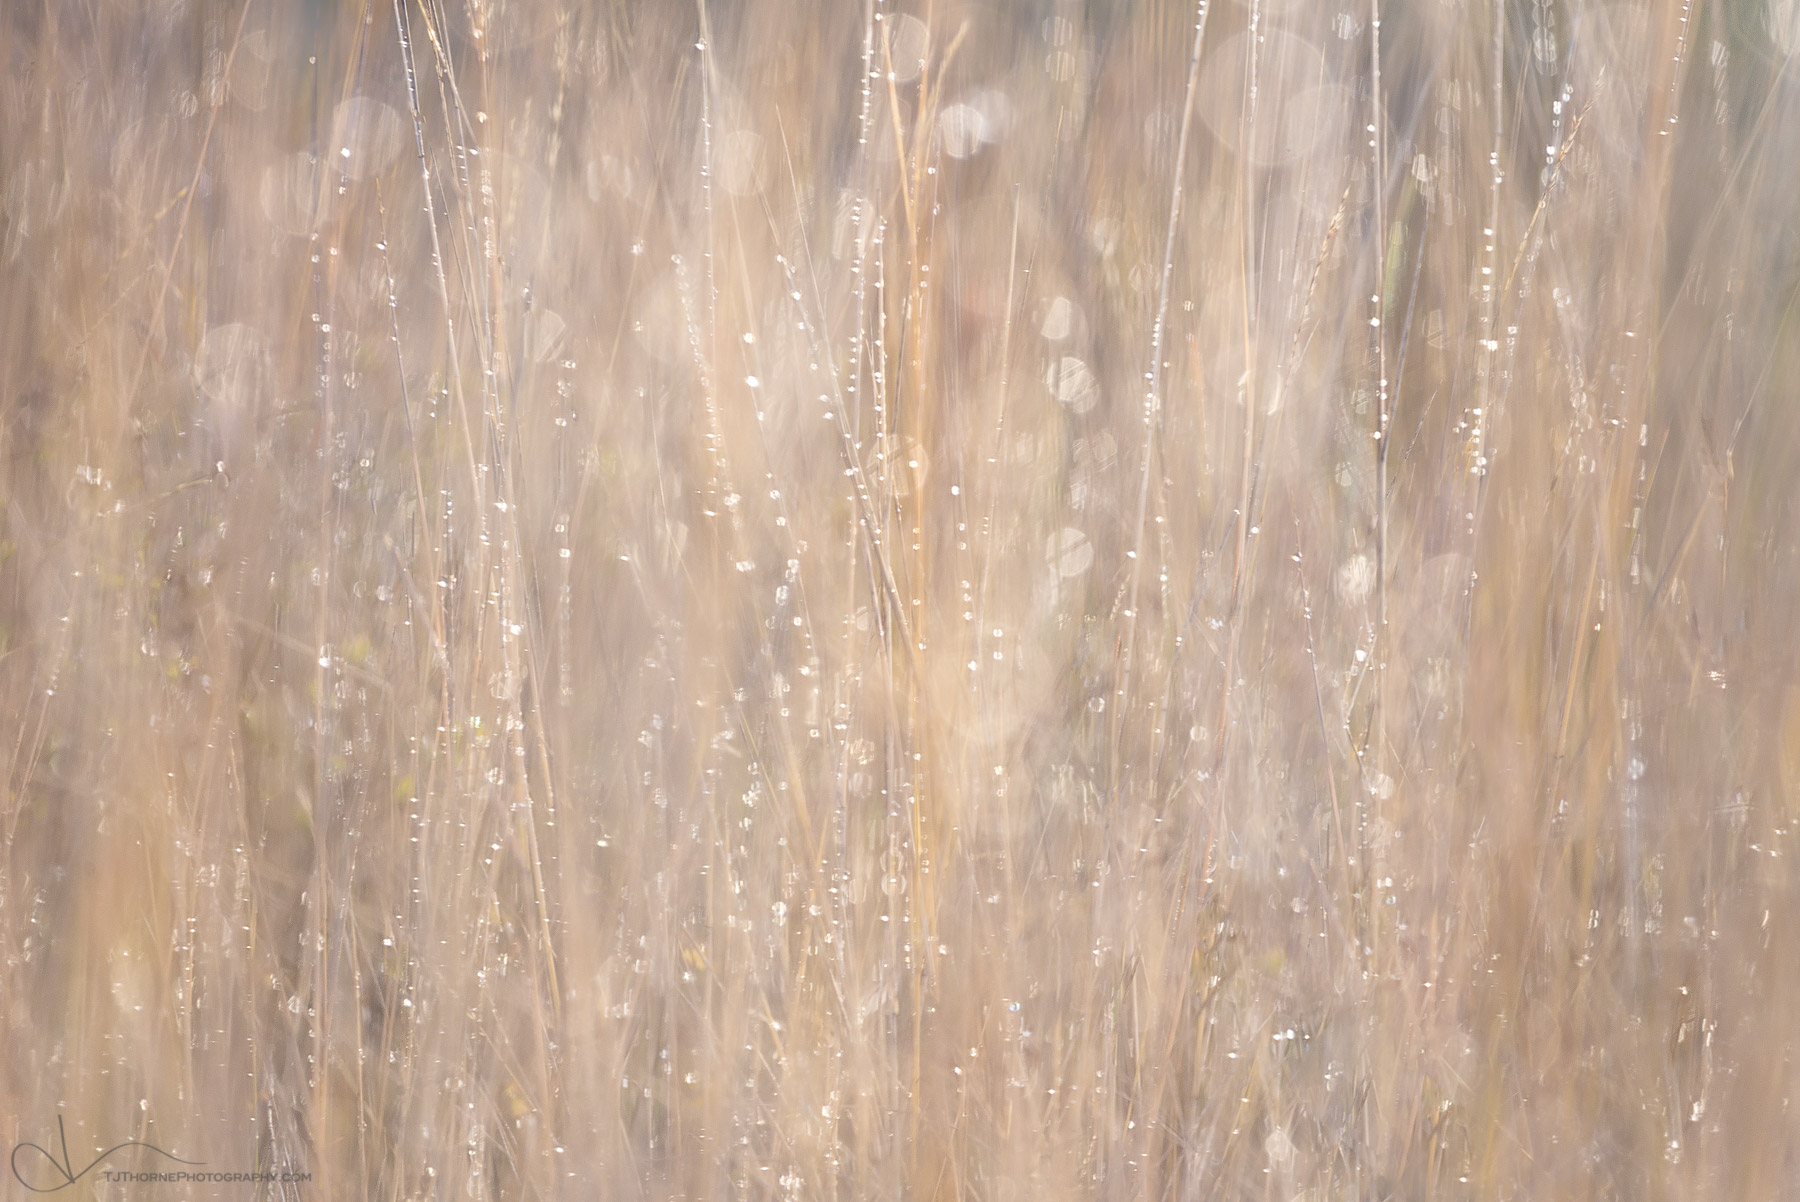 Evening light filters through wet autumn grasses in Gifford Pinchot National Forest, Washington. One of my favorite things to...